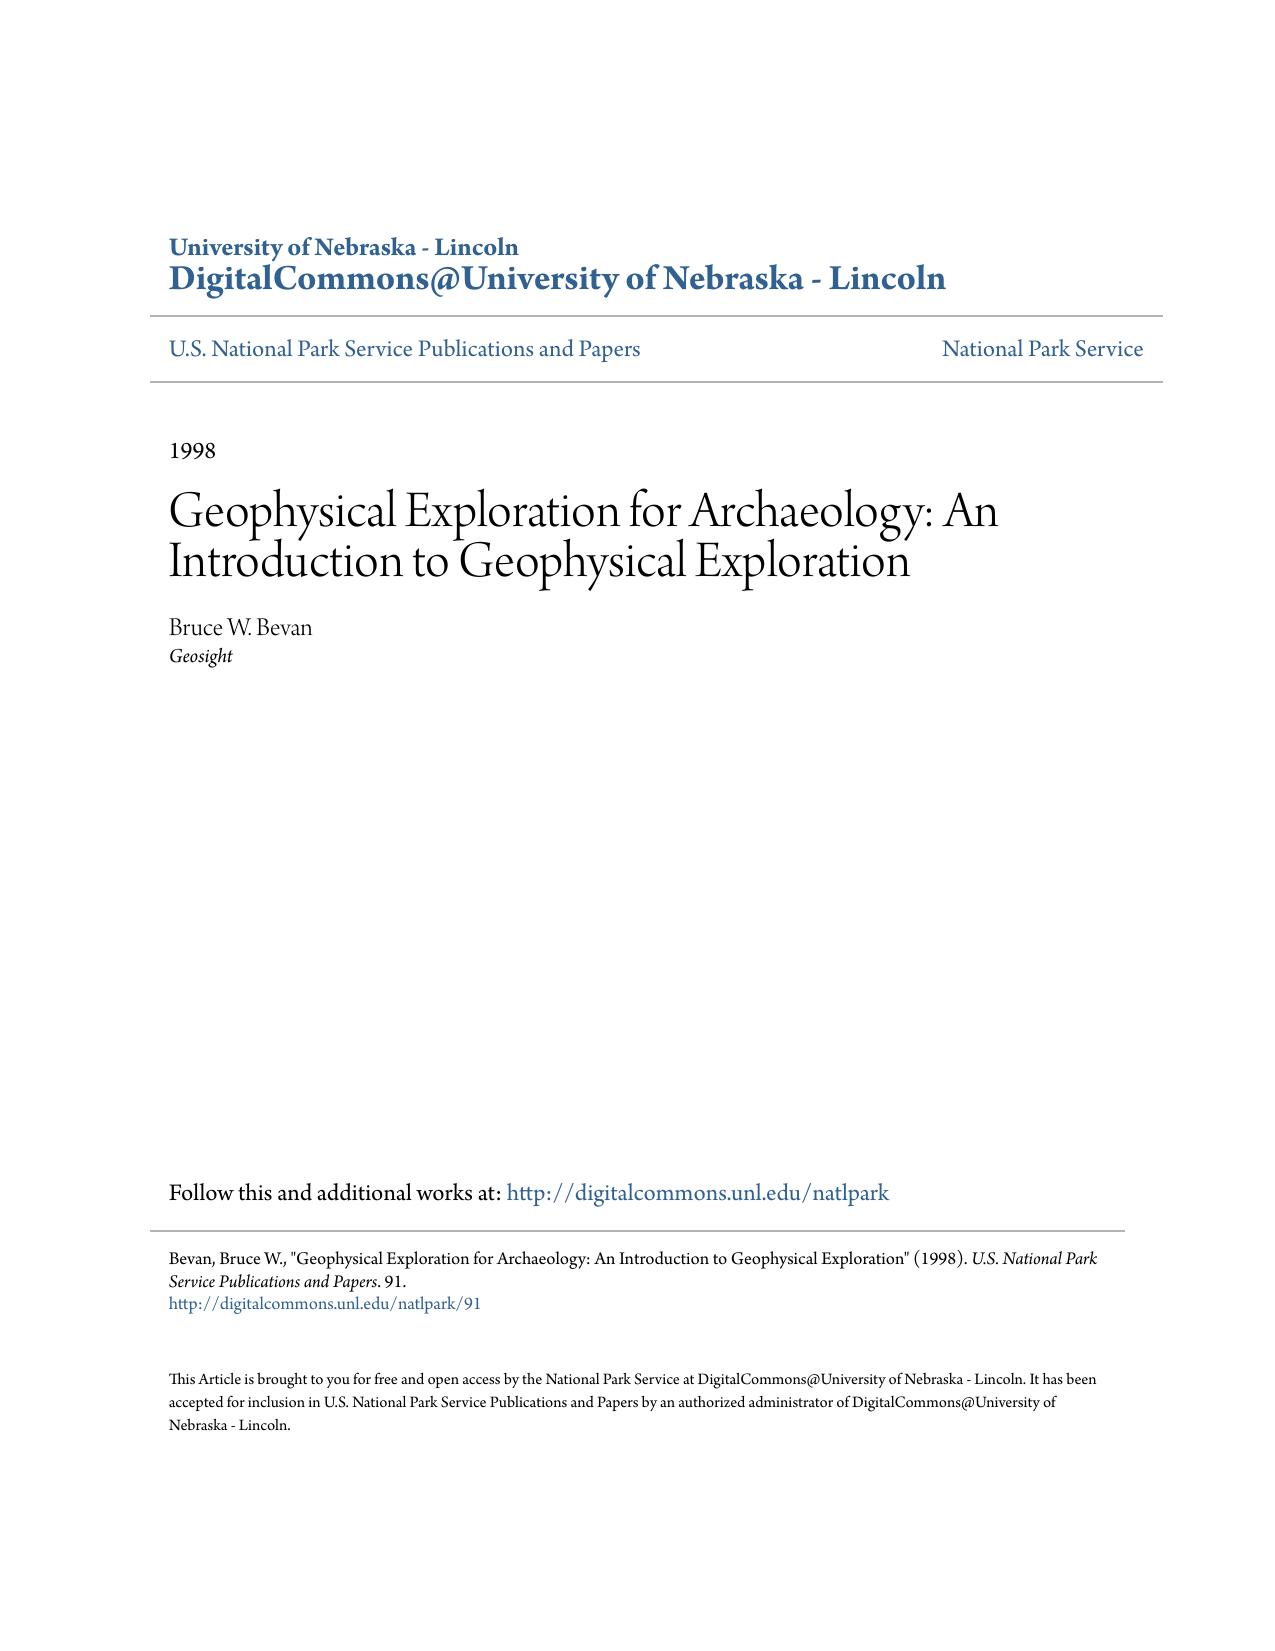 Geophysical Exploration for Archaeology: An Introduction to
Geophysical Exploration